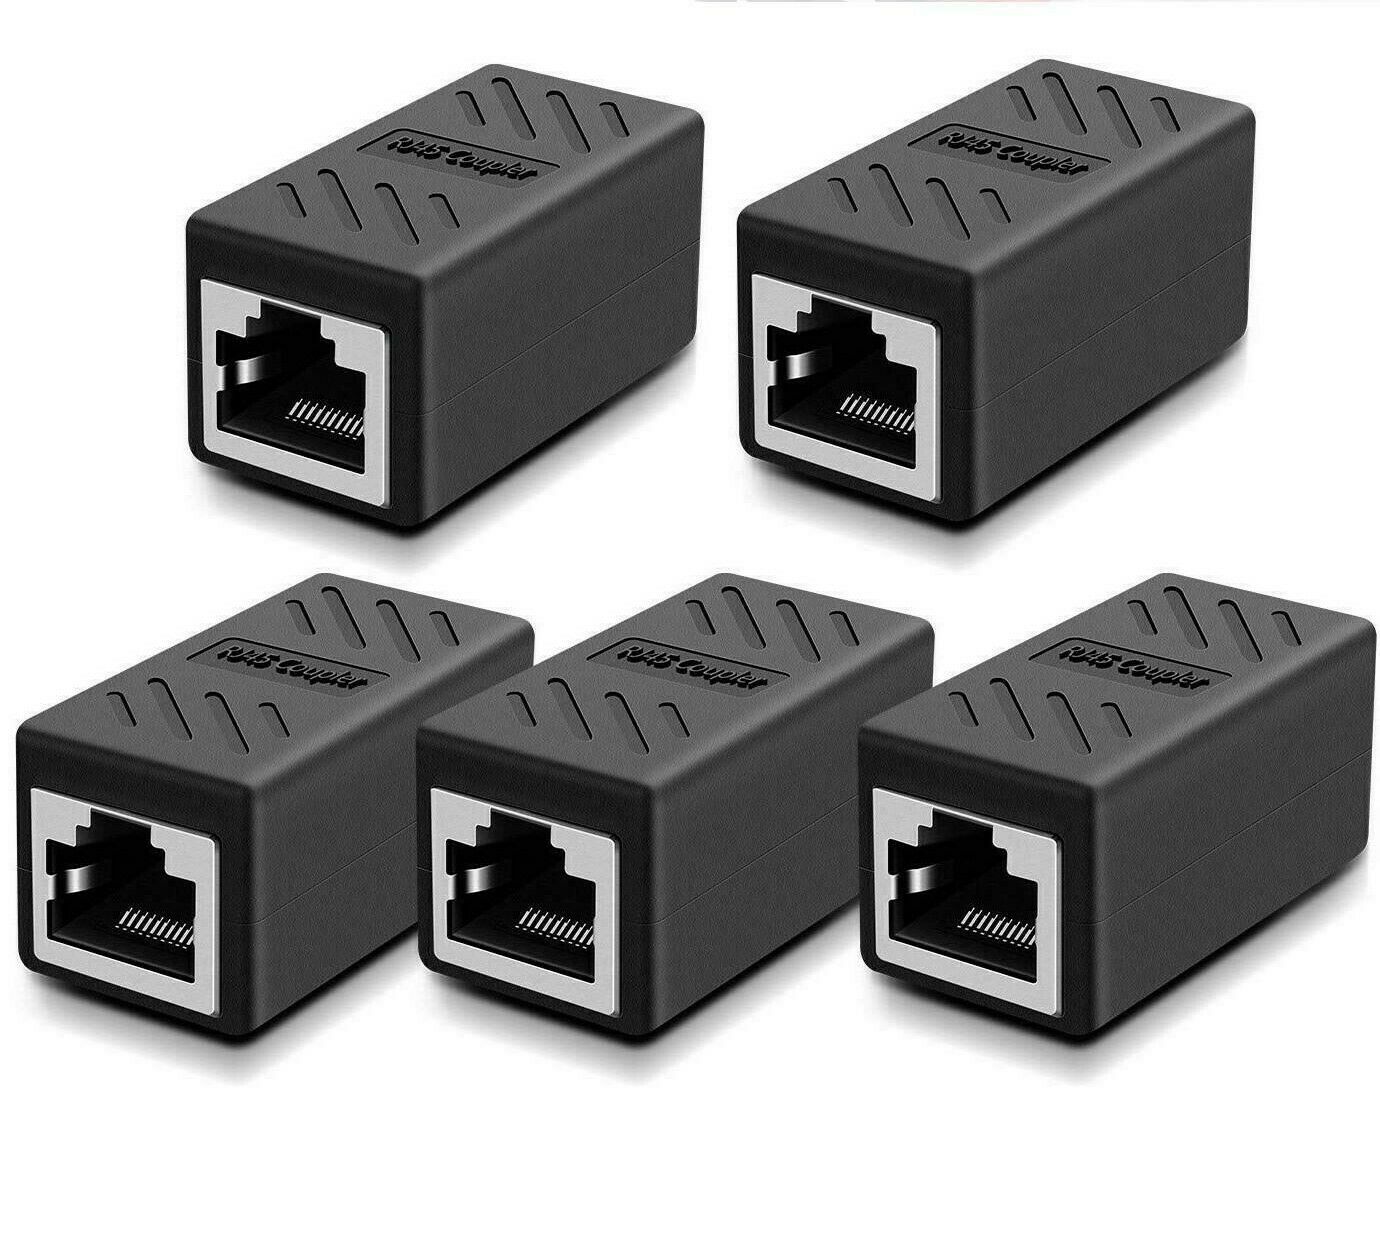 (5 Pack) Rj45 Inline Coupler Cat7 Cat6 Cat5e Ethernet Lan Network Cable Adapter